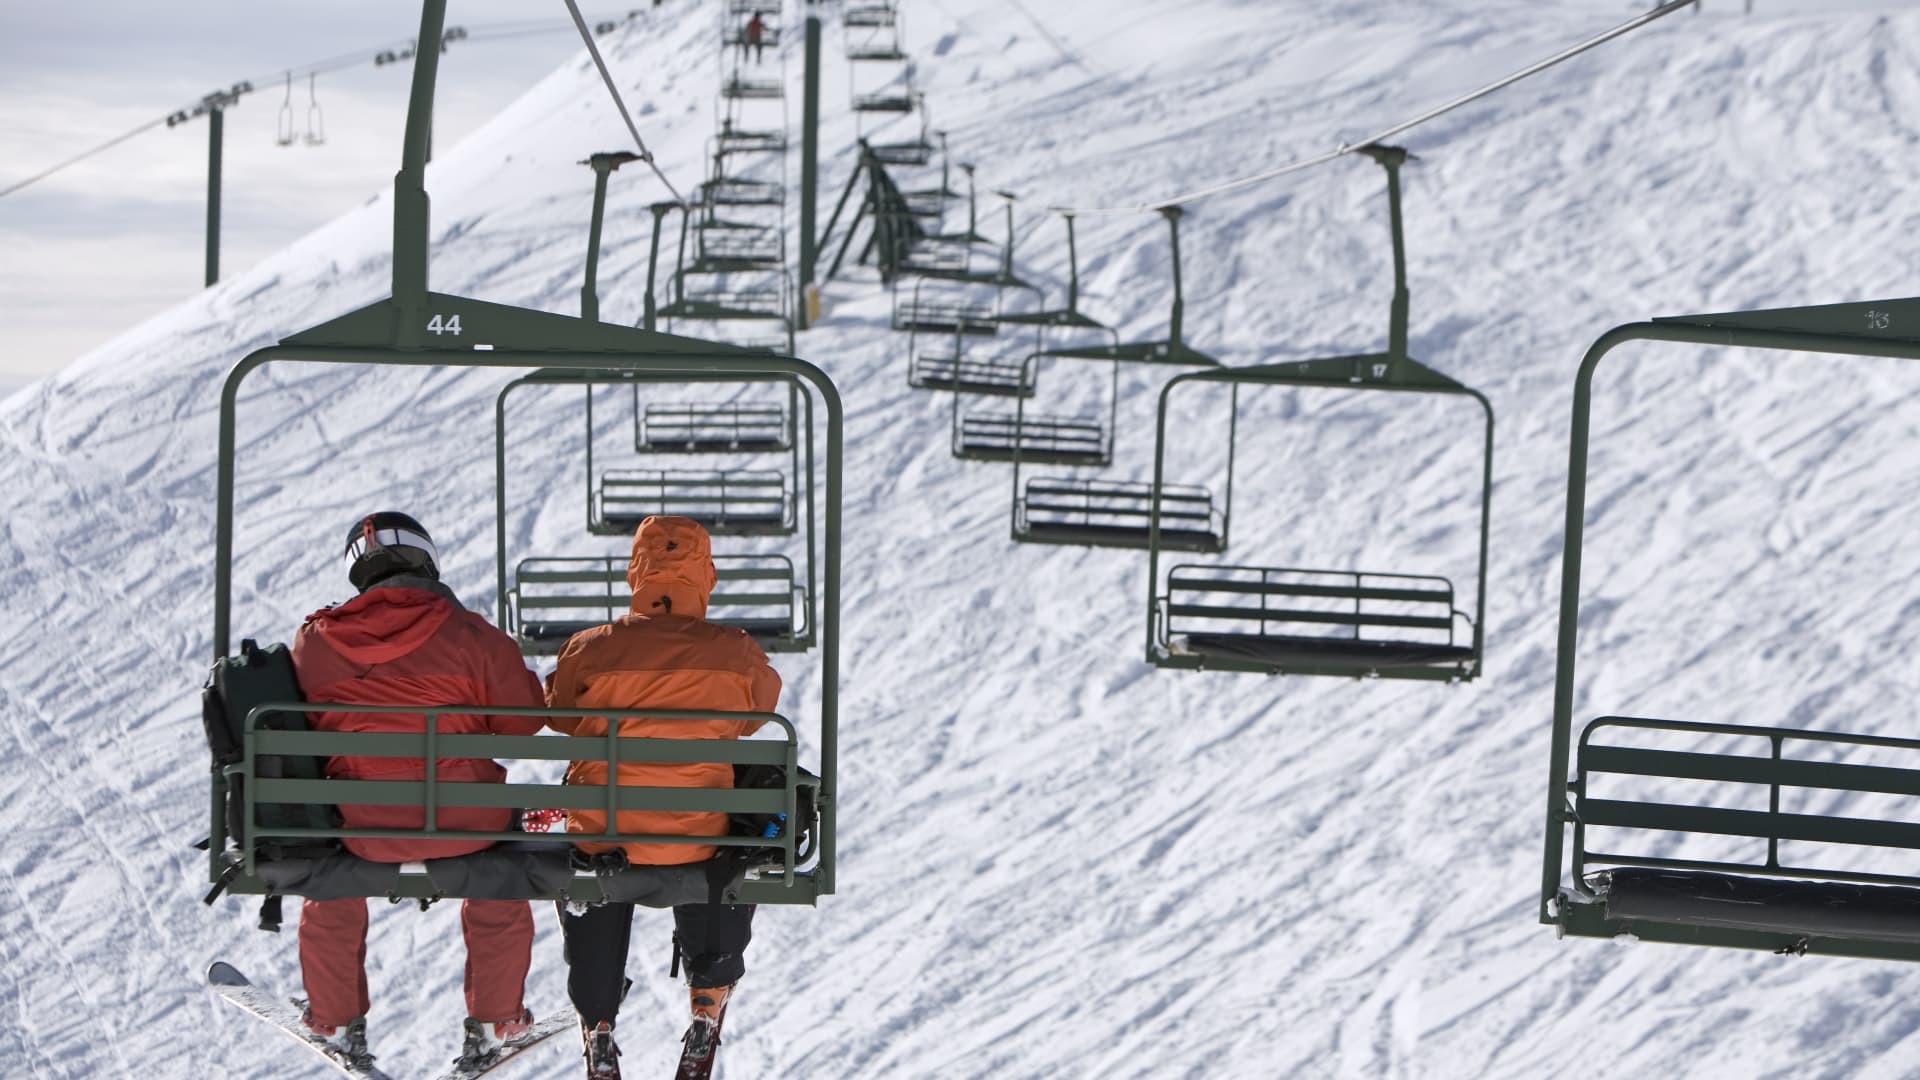 Skiers ascend the slopes on a socially distanced ski lift.